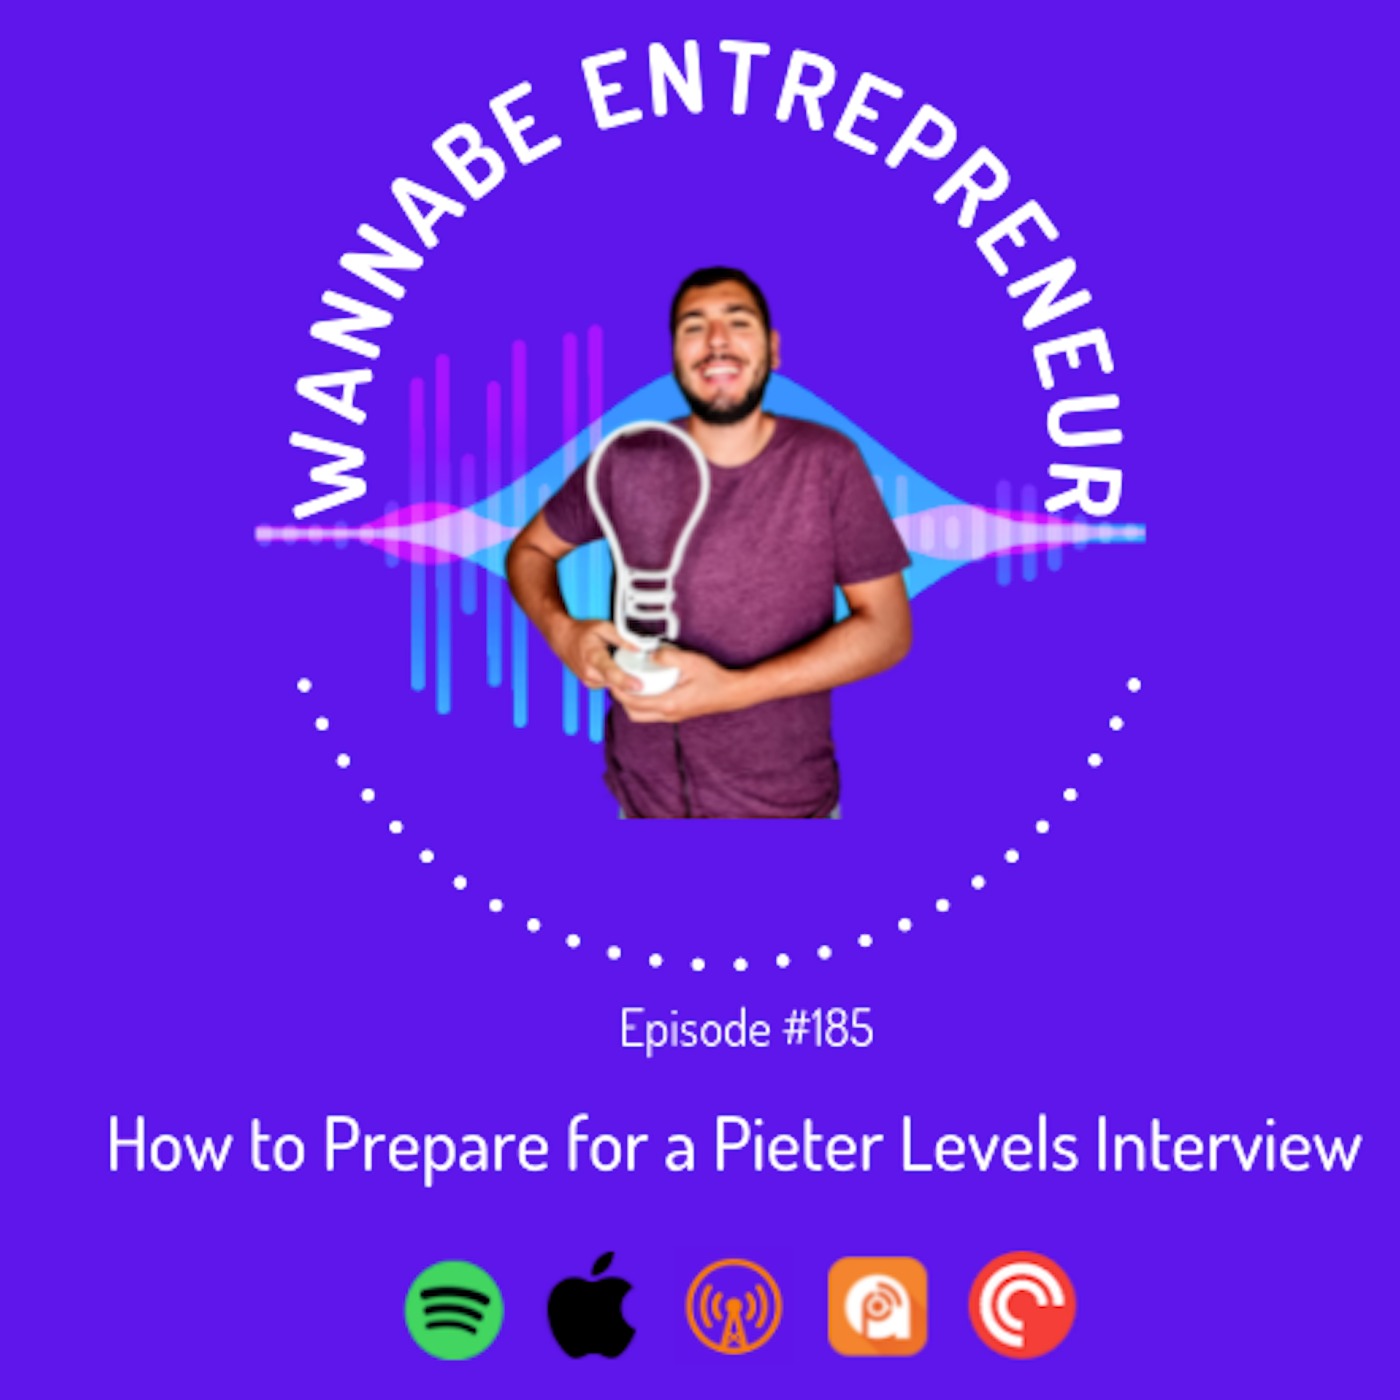 How to prepare for a Pieter Levels Interview